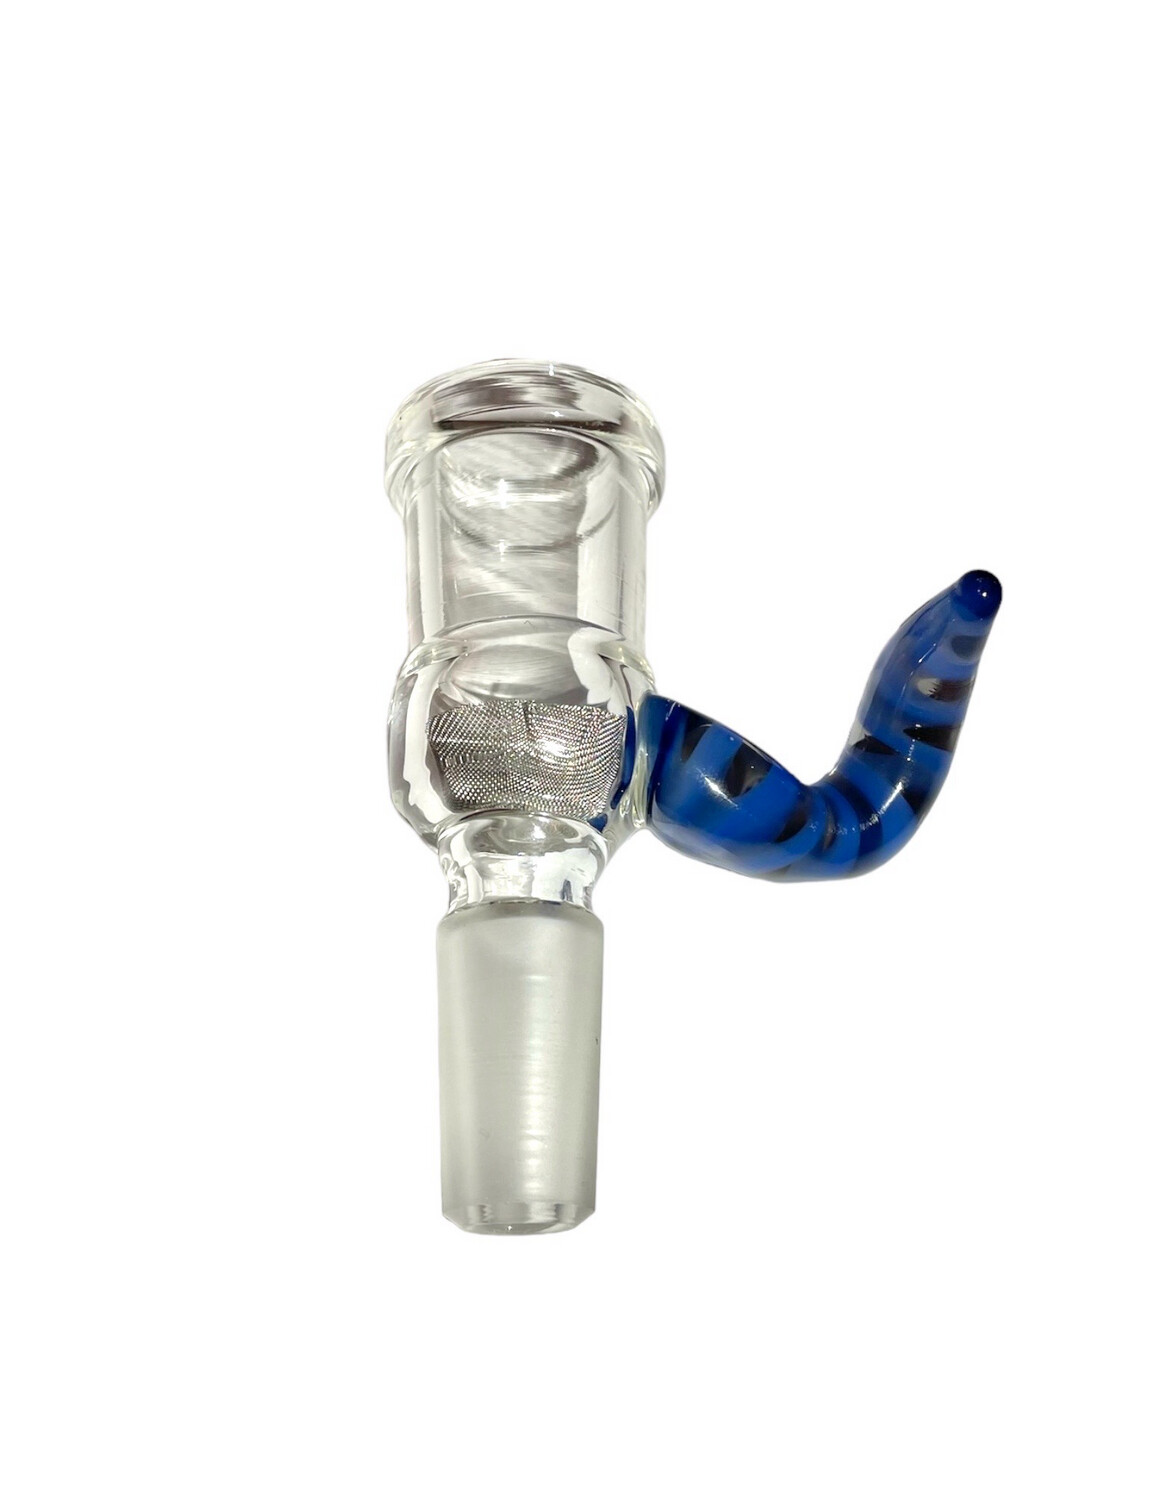 18mm Injector Bowl With A Swirled Blue And Gray Horn + A 14mm Male Joint